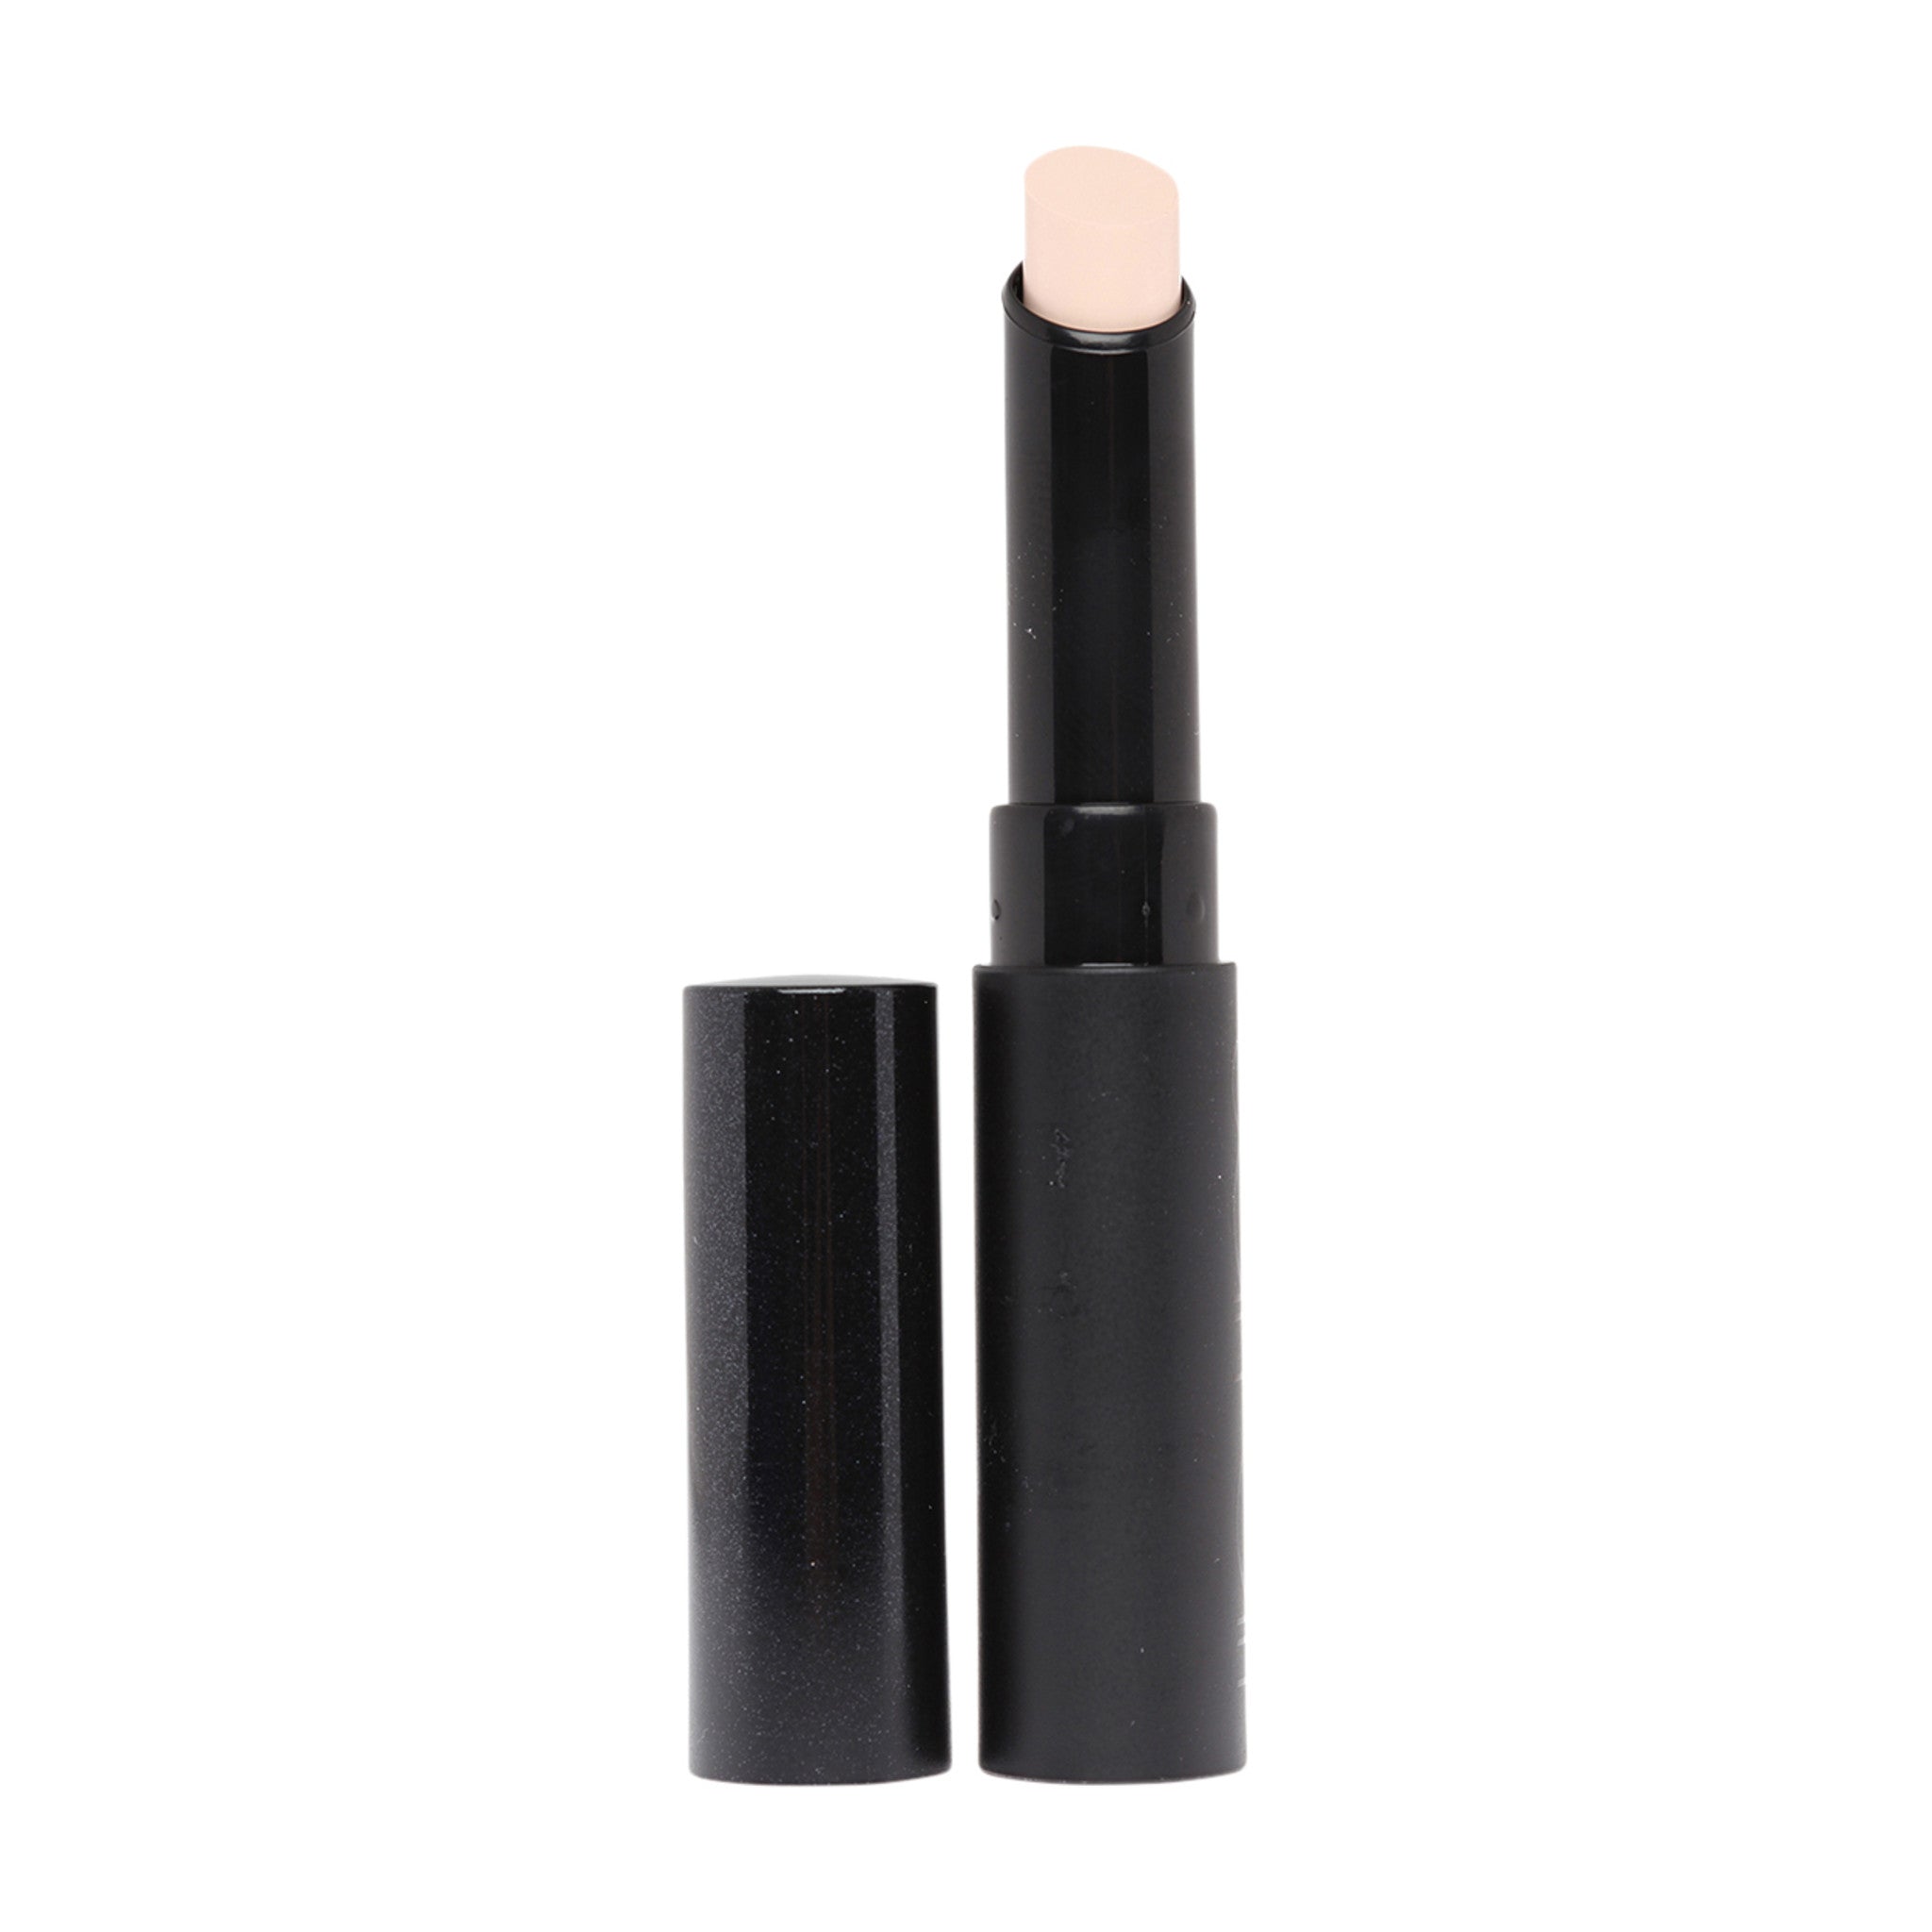 Surratt Surreal Skin Concealer Color/Shade variant: 1 main image. This product is for light cool pink complexions